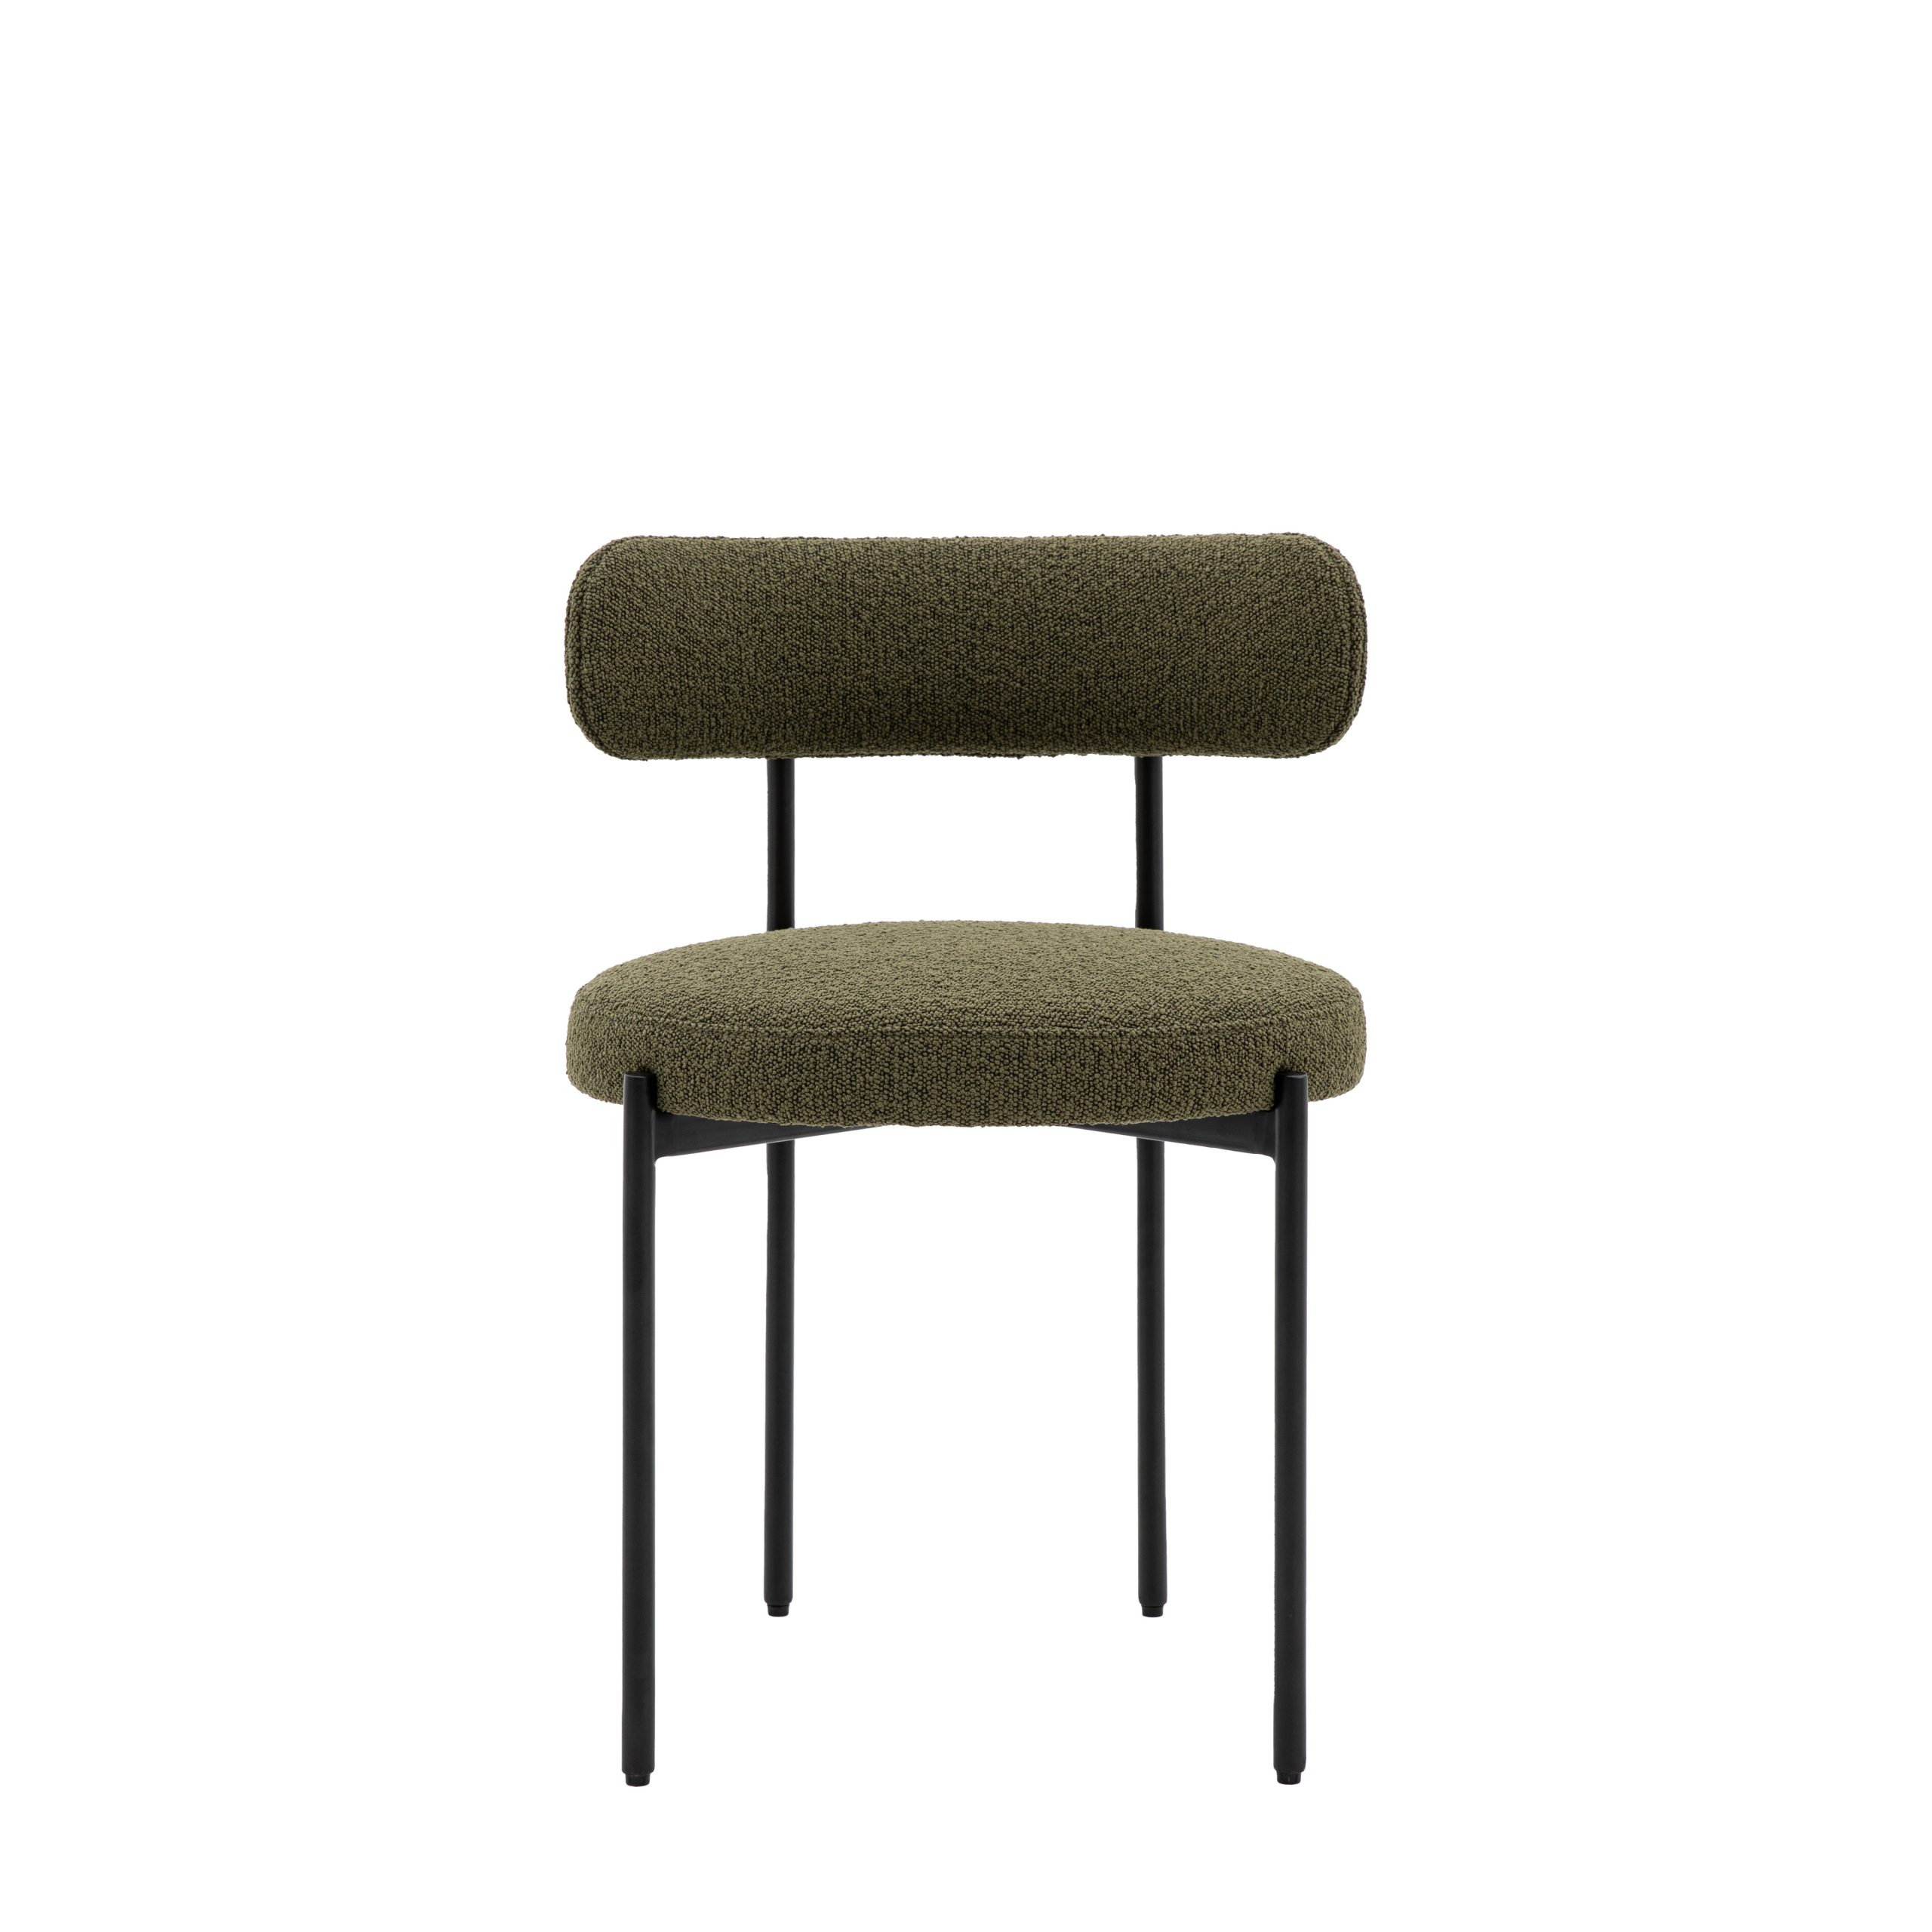 Gallery Direct Aveley Dining Chair Green (Set of 2)